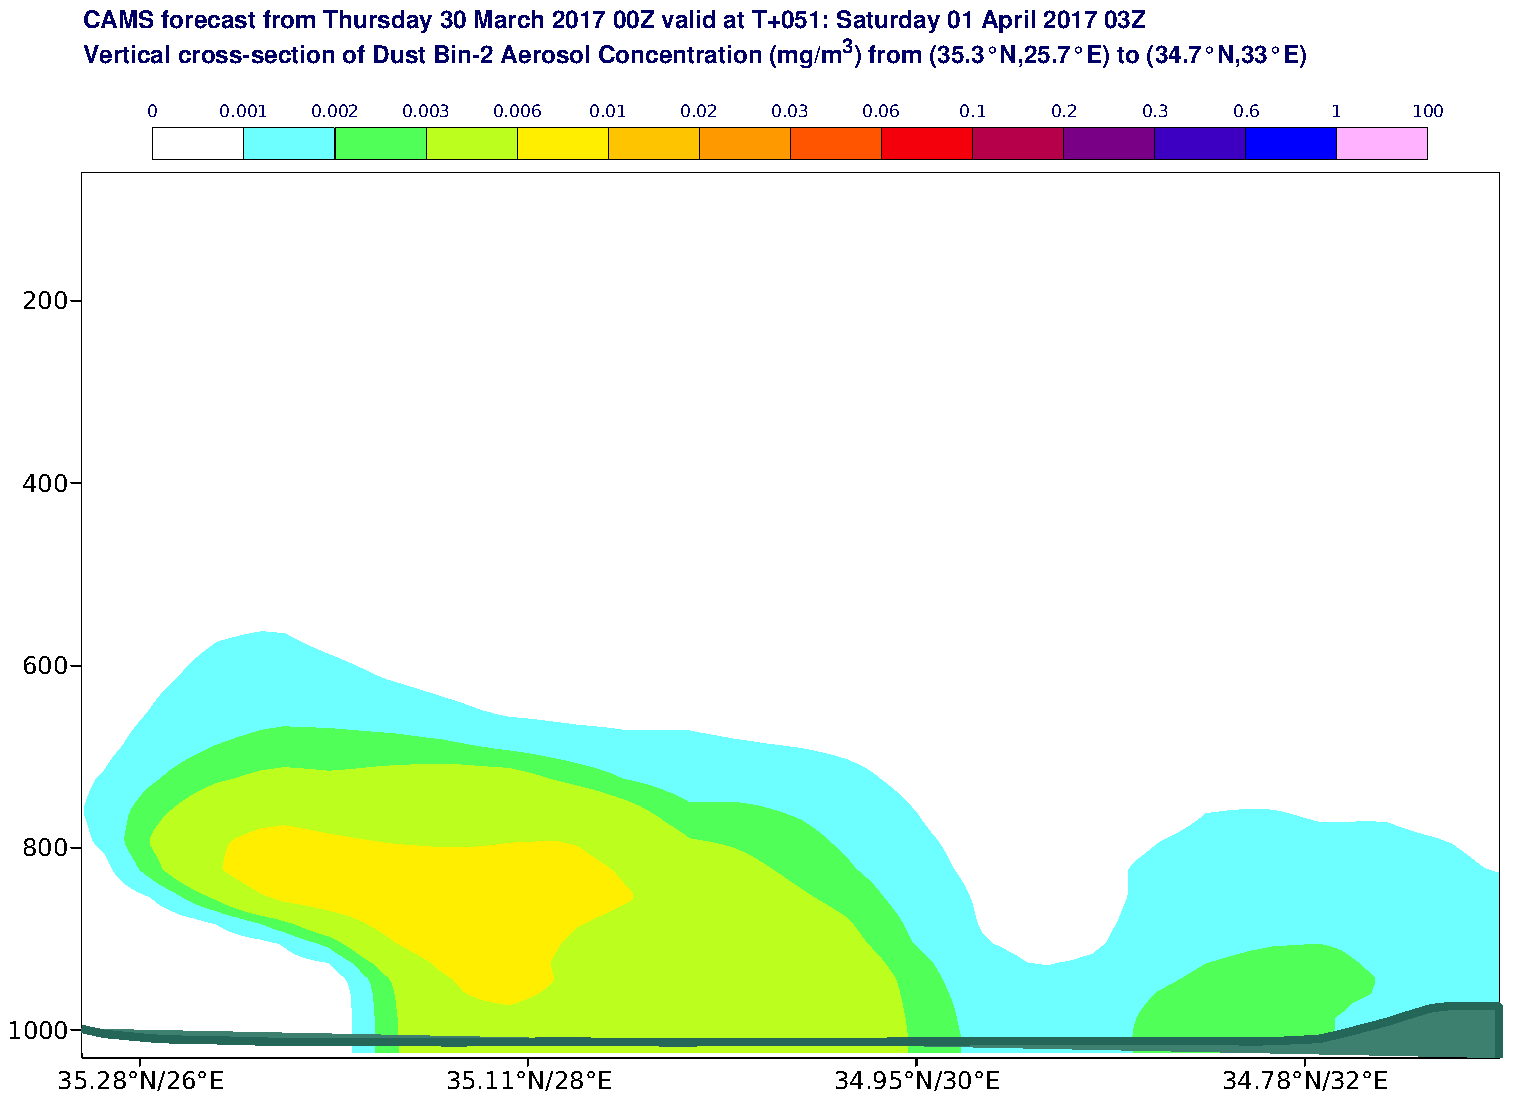 Vertical cross-section of Dust Bin-2 Aerosol Concentration (mg/m3) valid at T51 - 2017-04-01 03:00